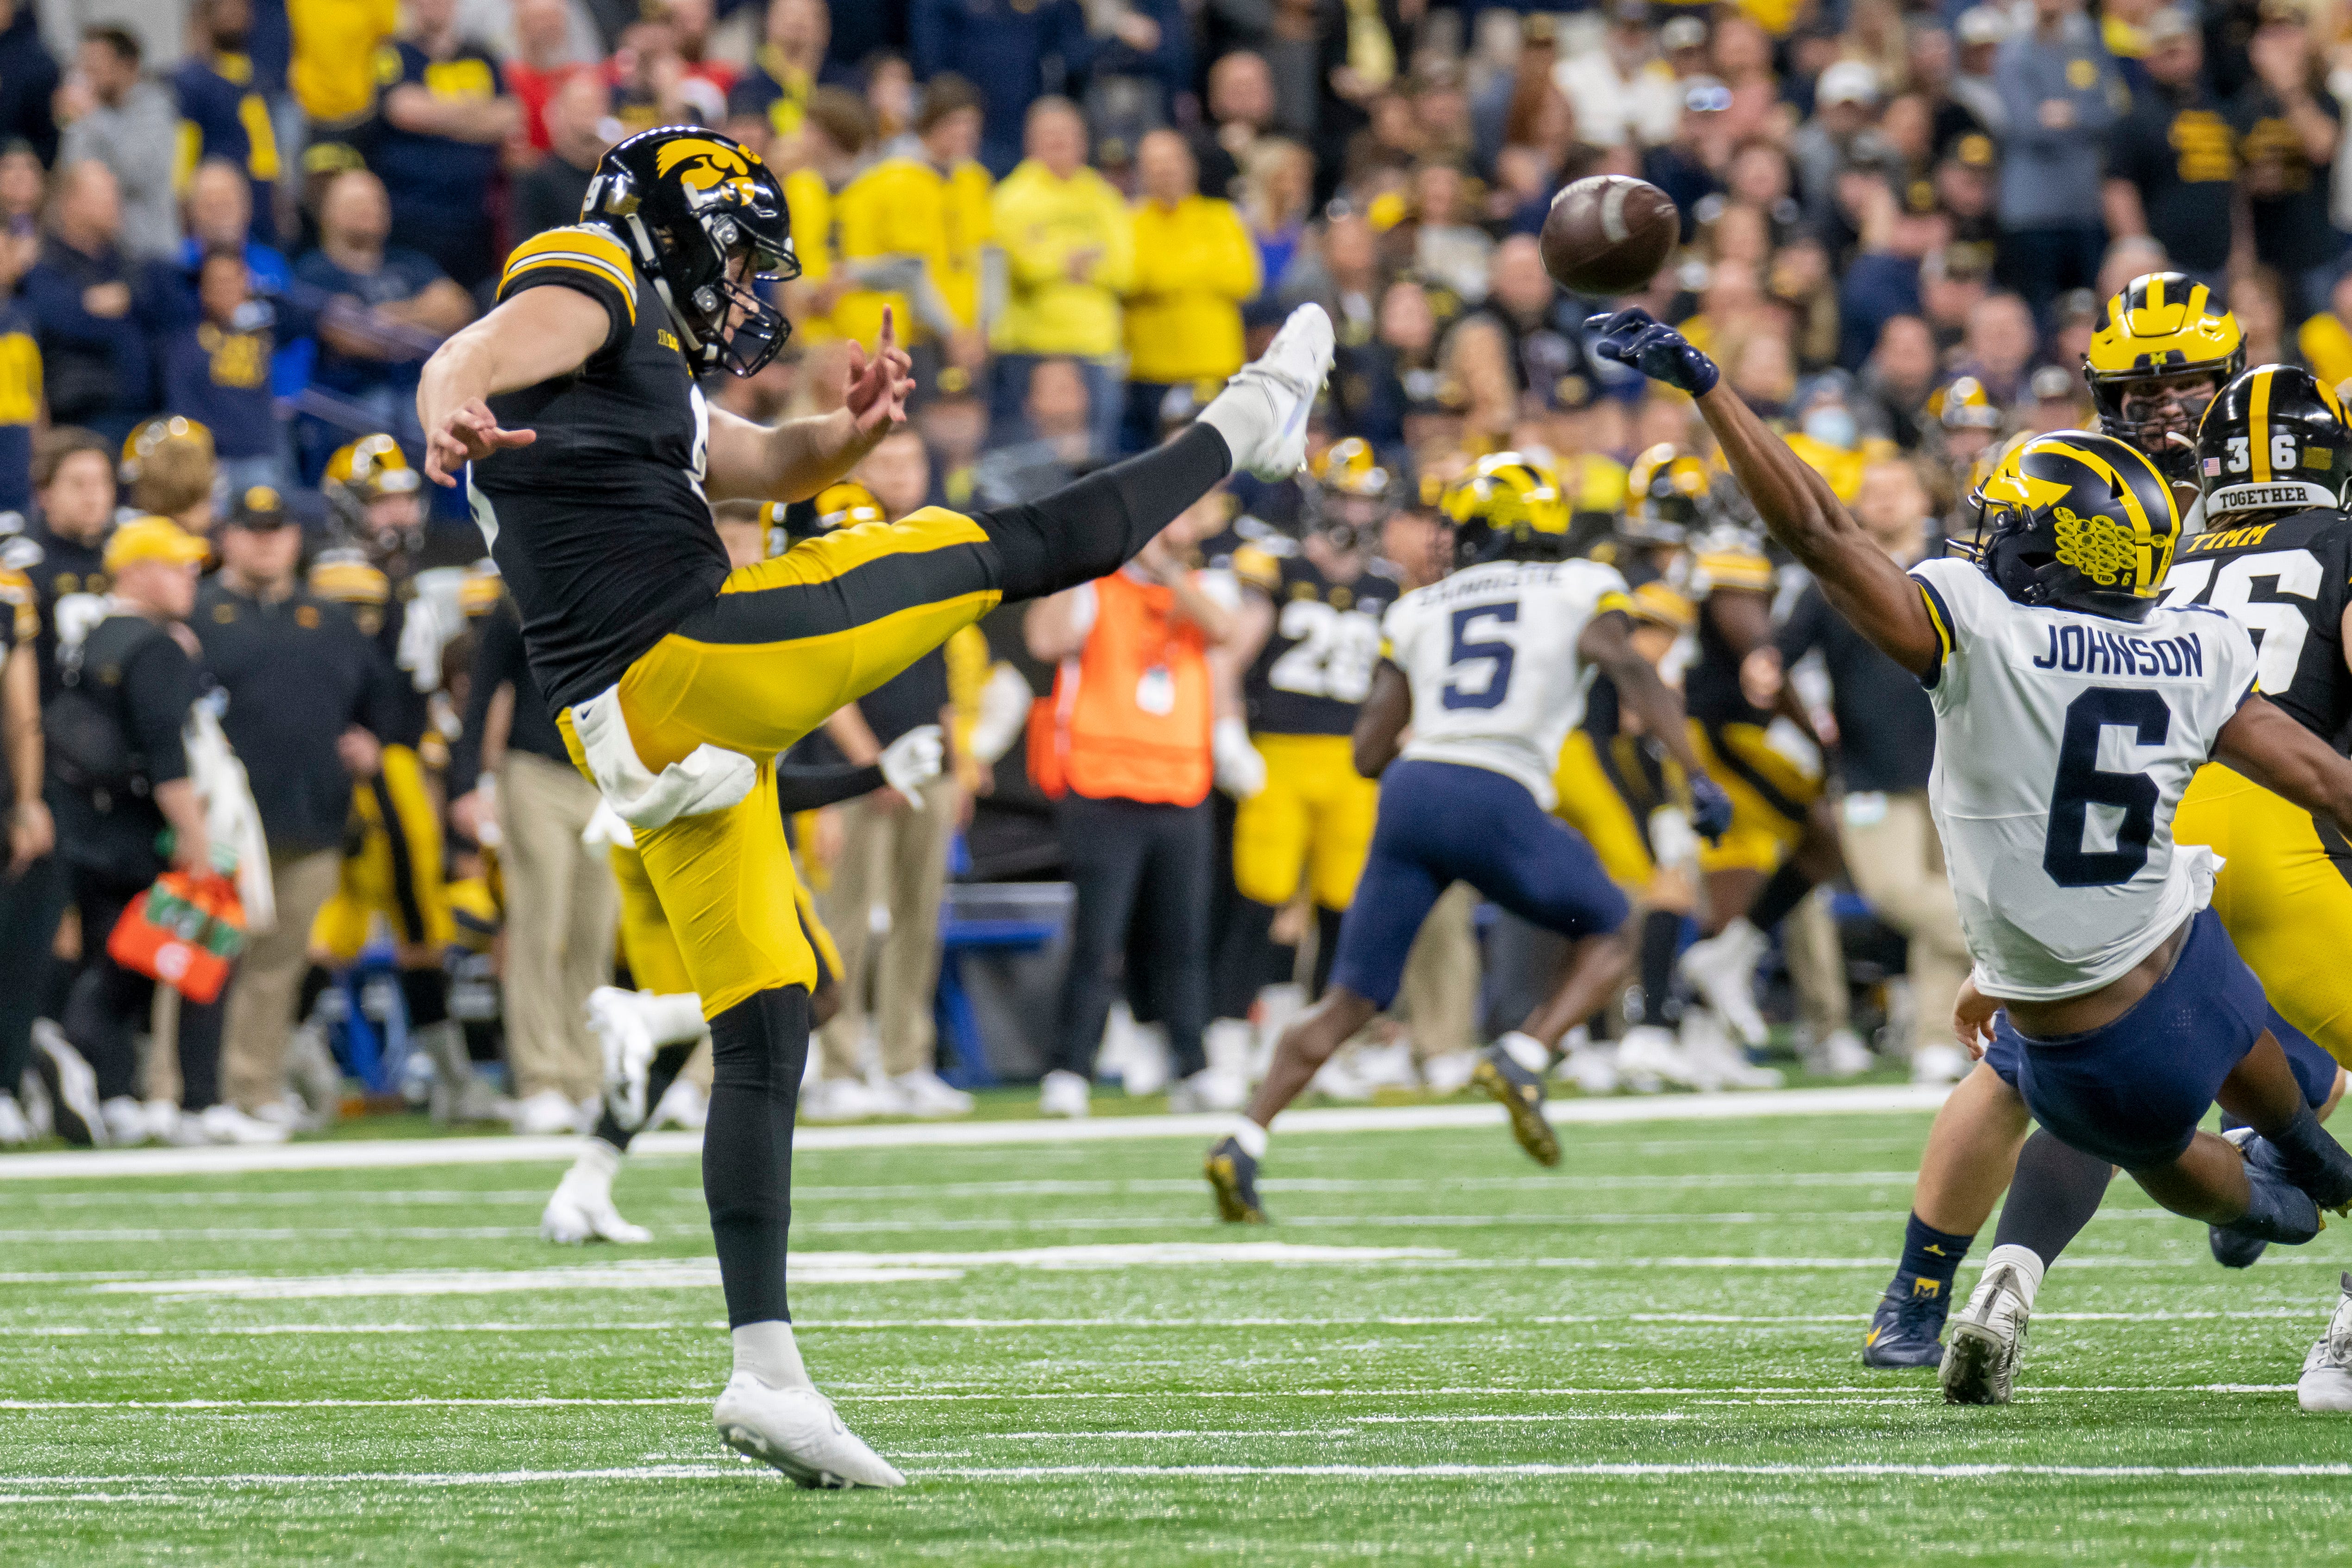 Michigan wide receiver Cornelius Johnson blocks a punt by Iowa punter Tory Taylor during the fourth quarter.